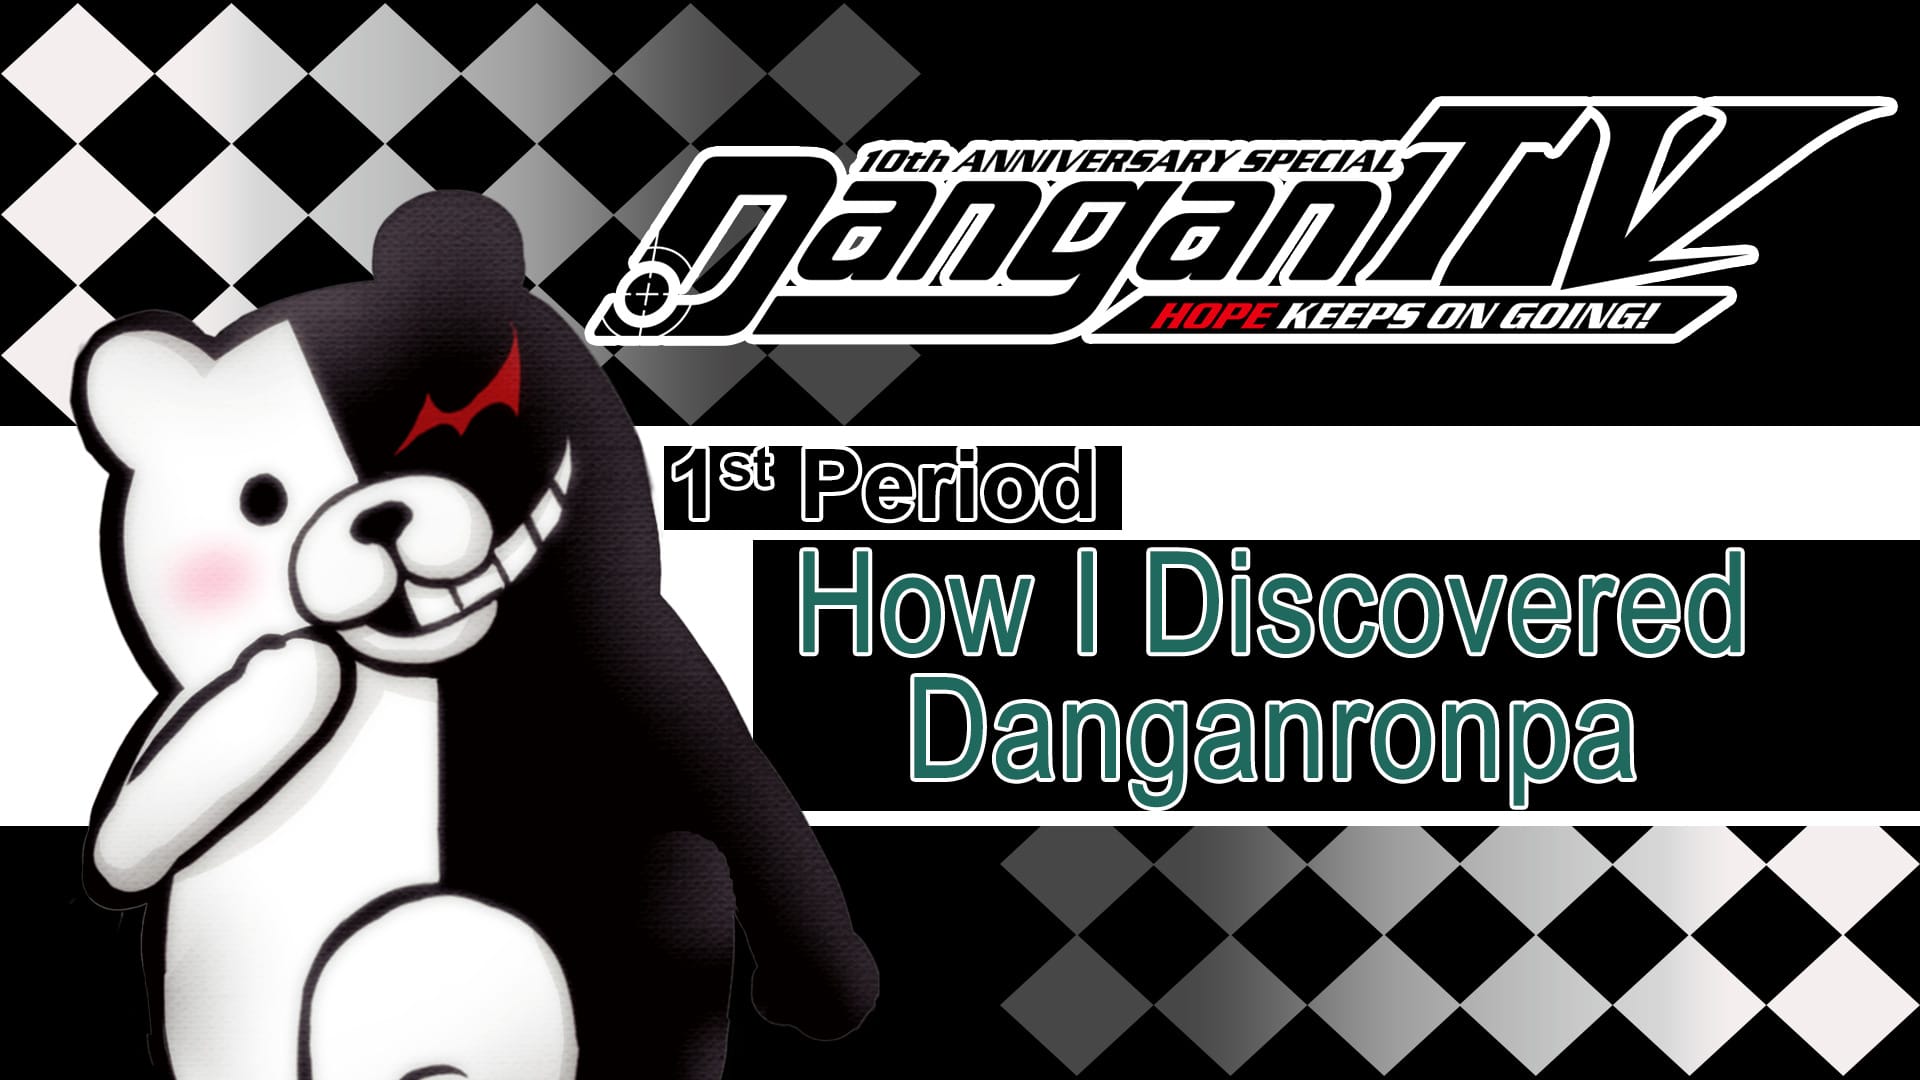 Dangan TV: Hope Keeps on Going Releases First Episode With Developer Commentary and Insight